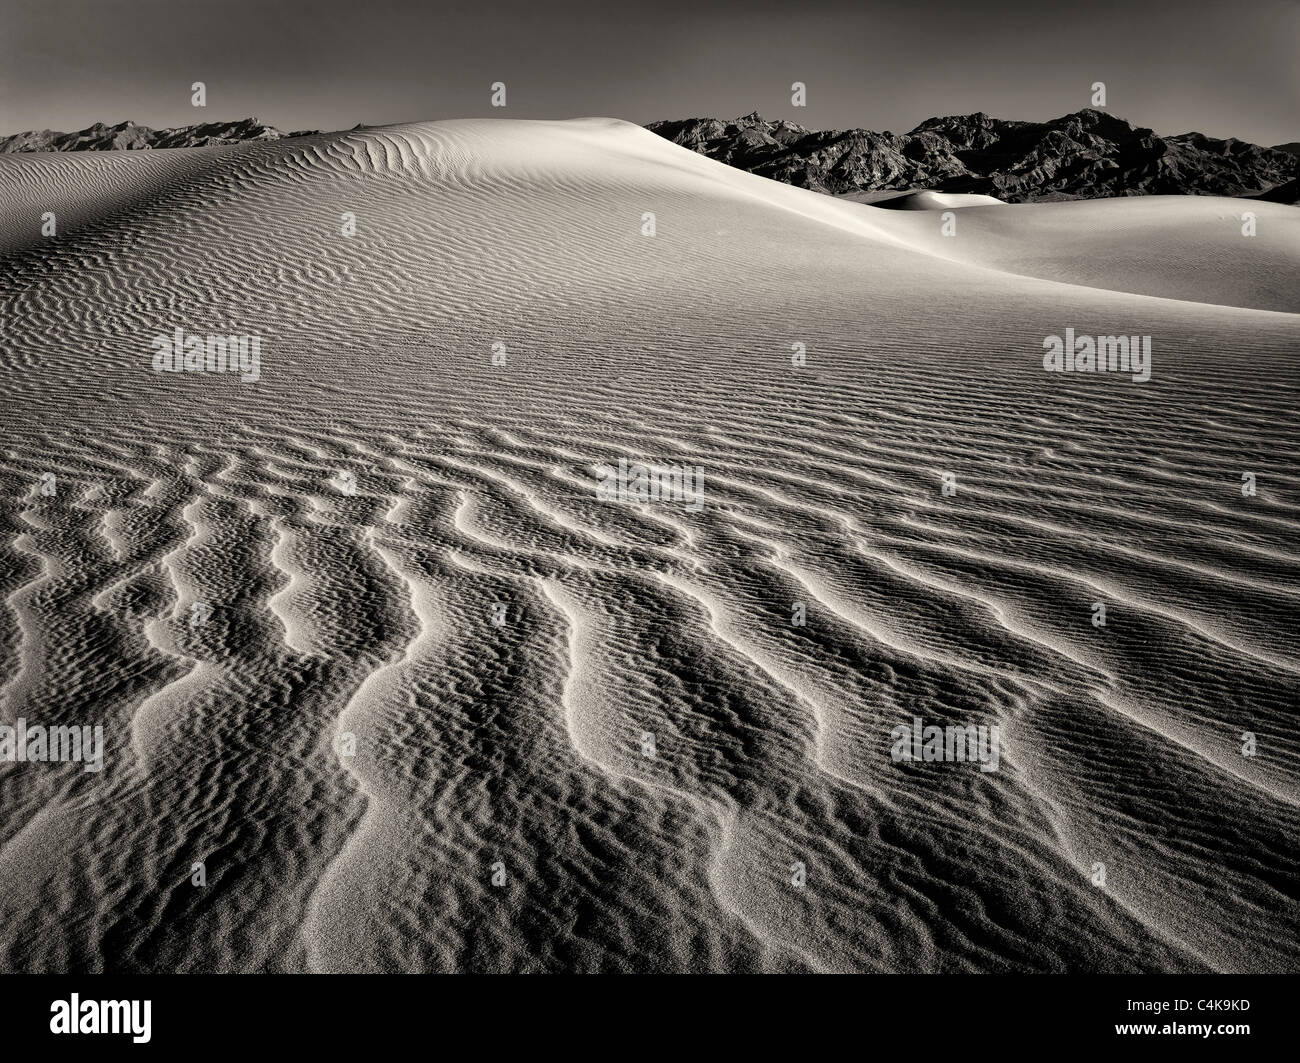 Patterns in sand after intense wind storm. Death Valley National Park, California Stock Photo